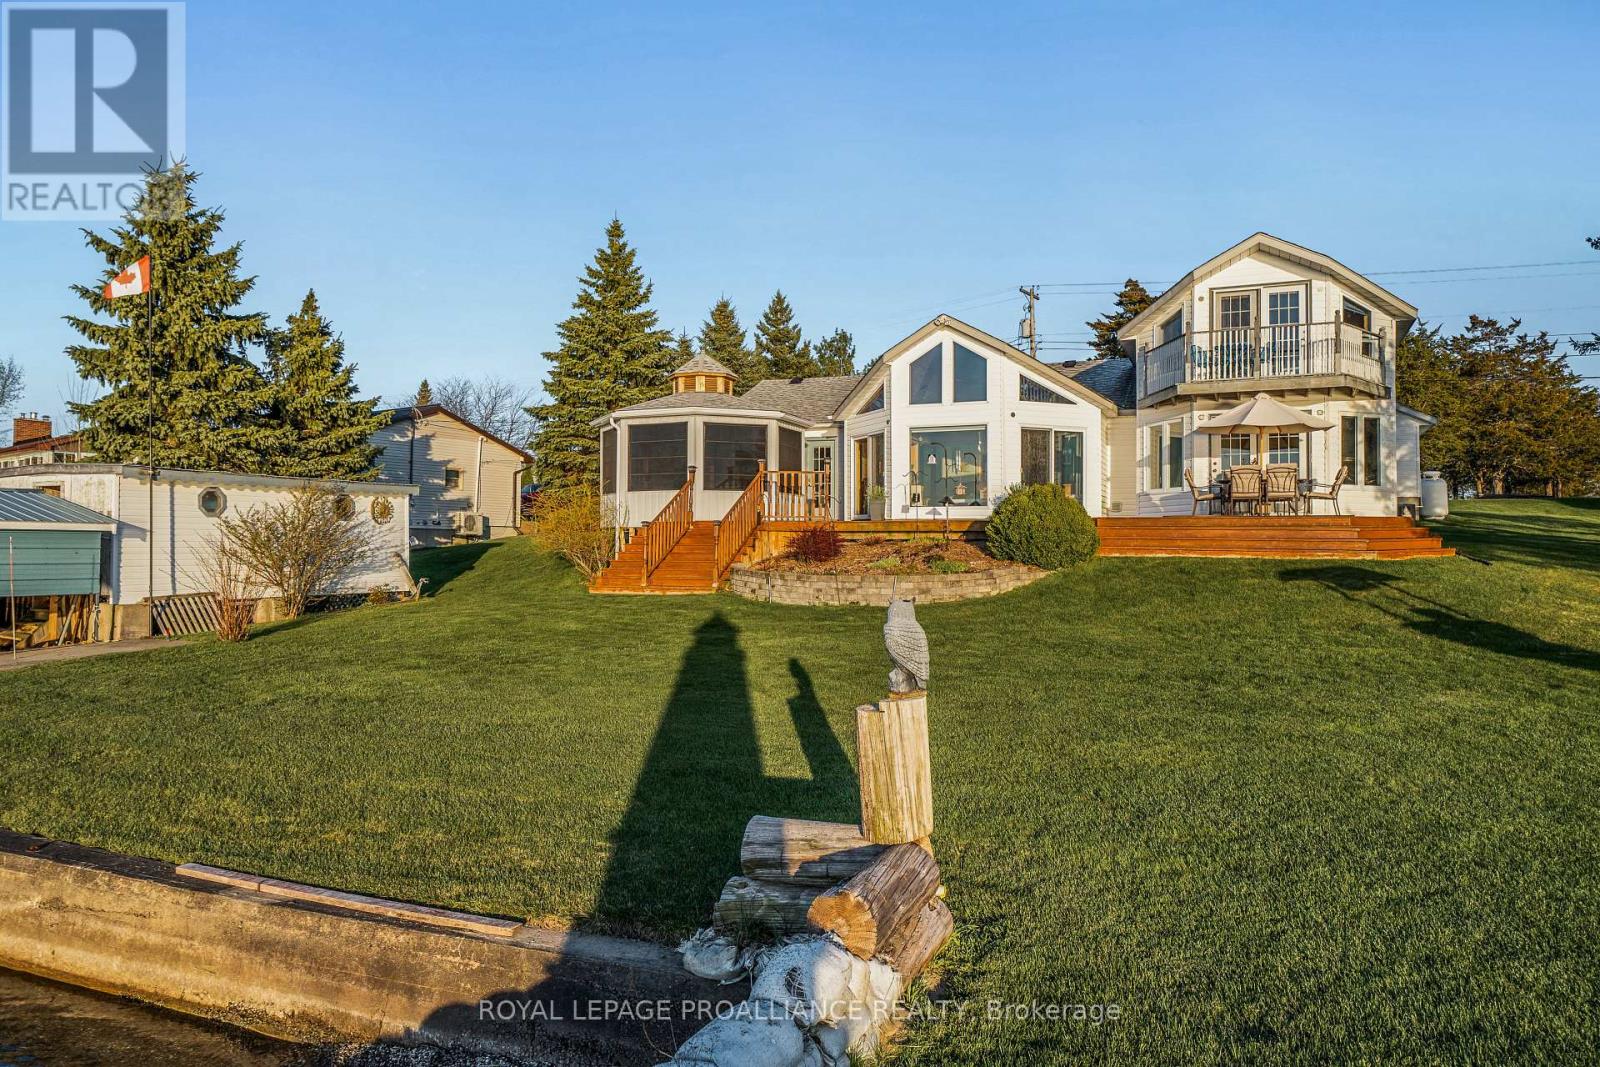 45 PEATS POINT ROAD Prince Edward County